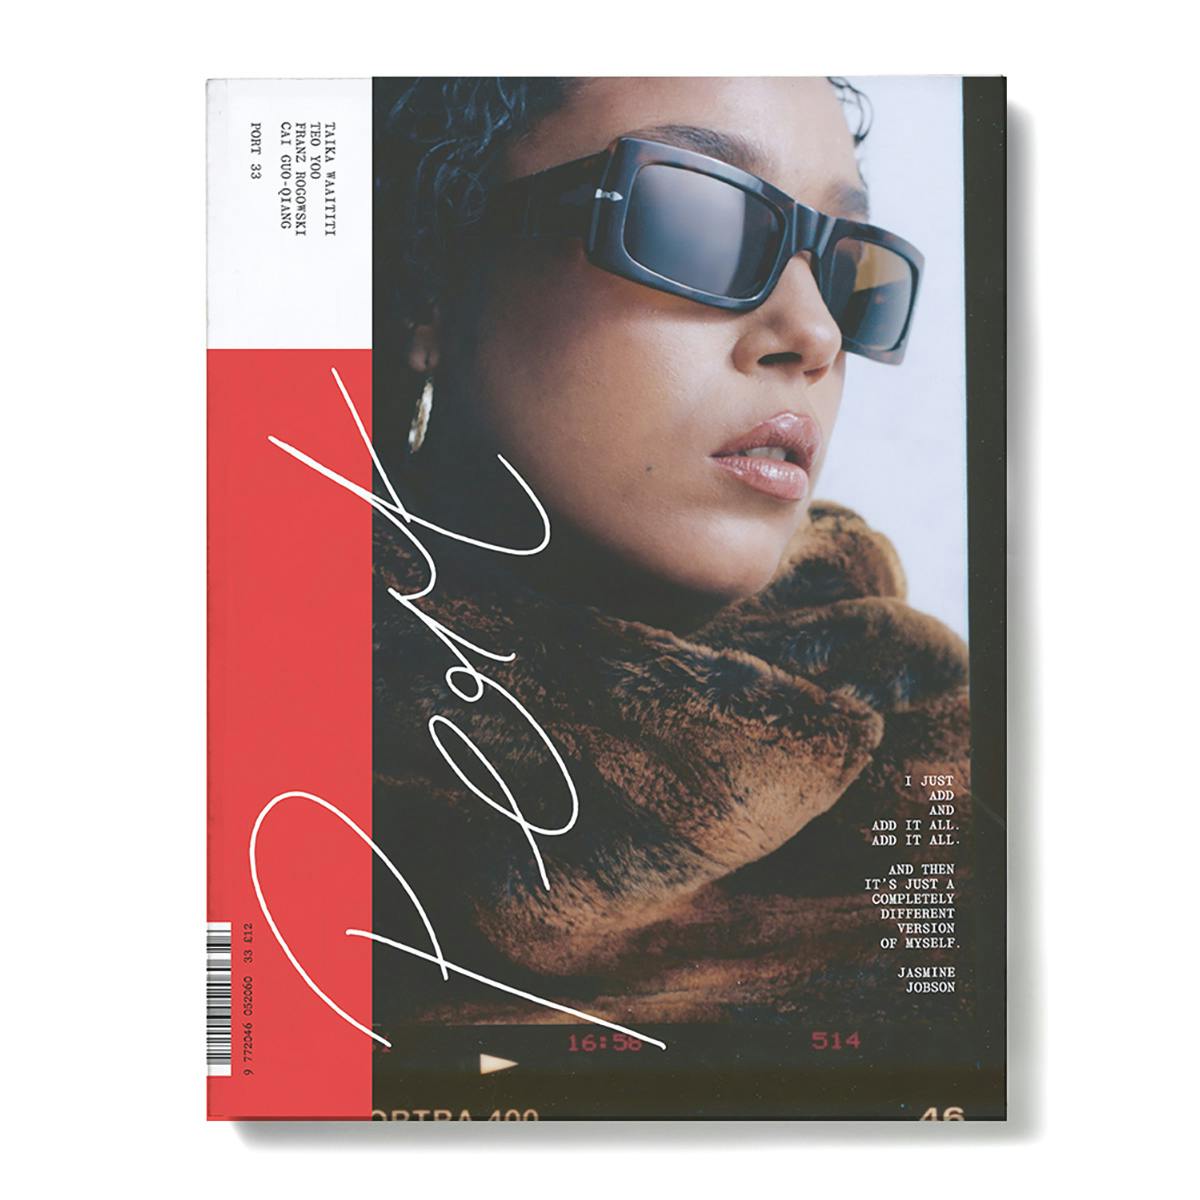 Photo of the cover of Port magazine with the masthead handwritten in white cursive lettering over the top of a photo of actor Jasmine Jobson wearing rectangular sunglasses and a furry coat